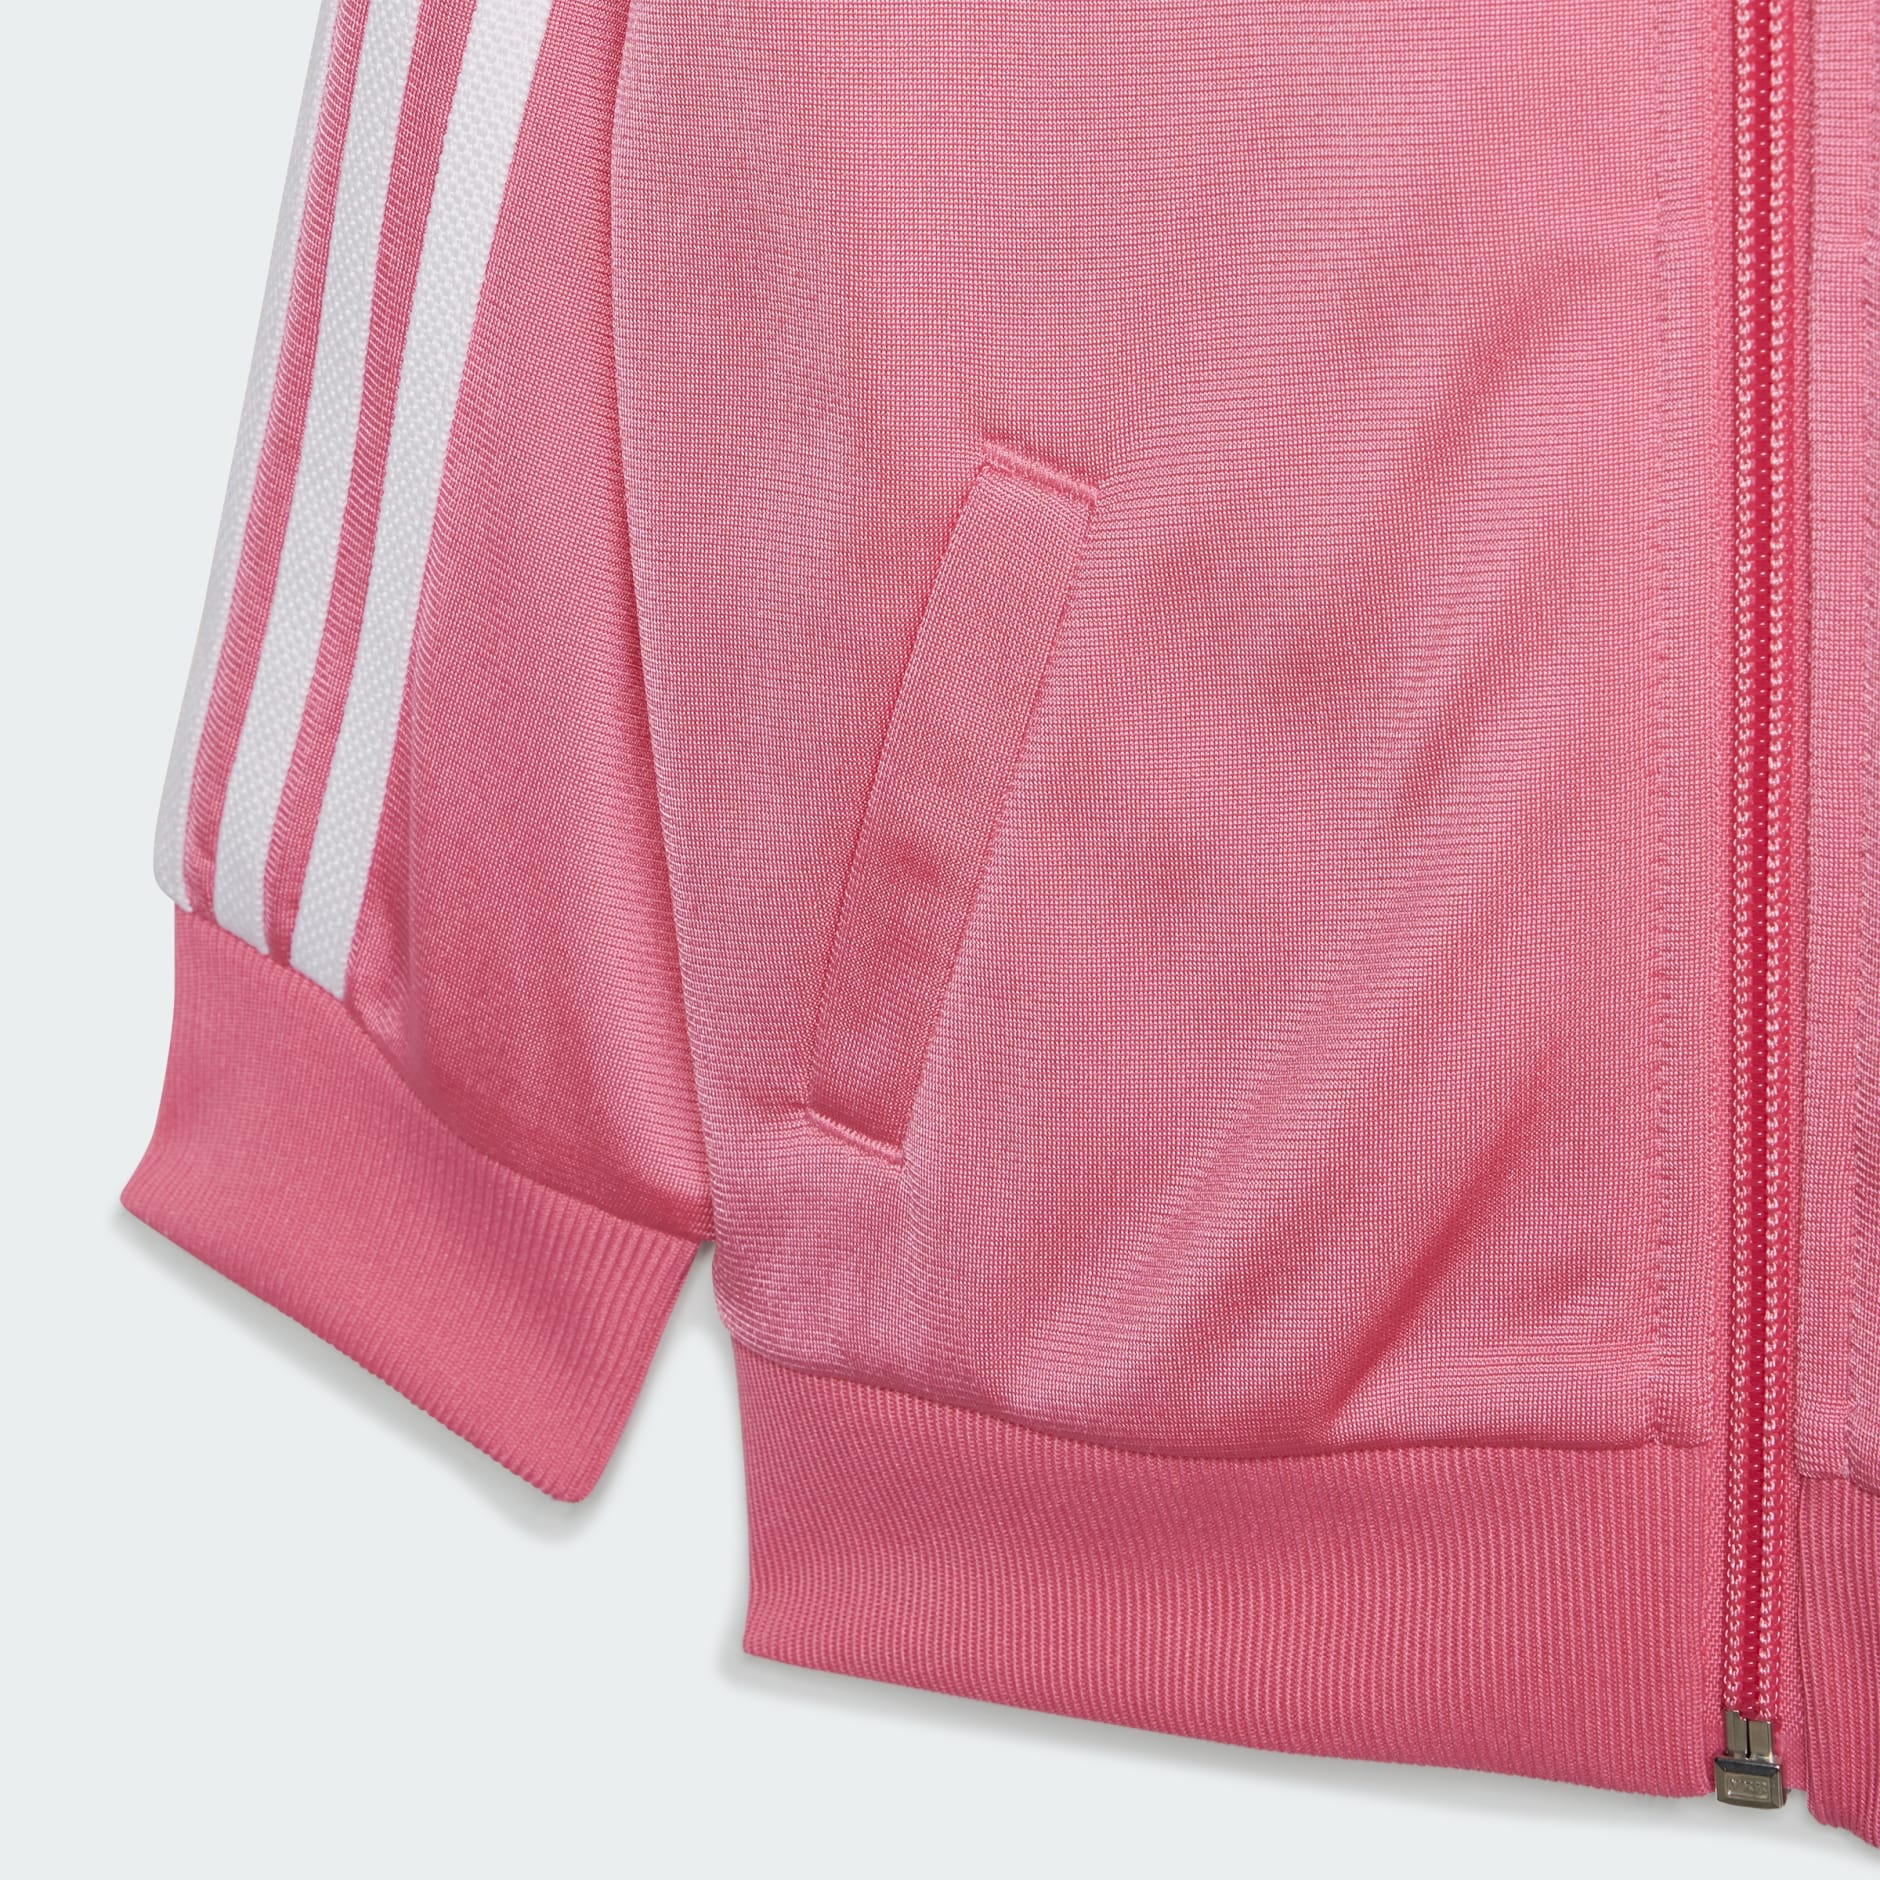 Adidas SST track top bliss pink women #SALEPASRAYA, Women's Fashion, Coats,  Jackets and Outerwear on Carousell